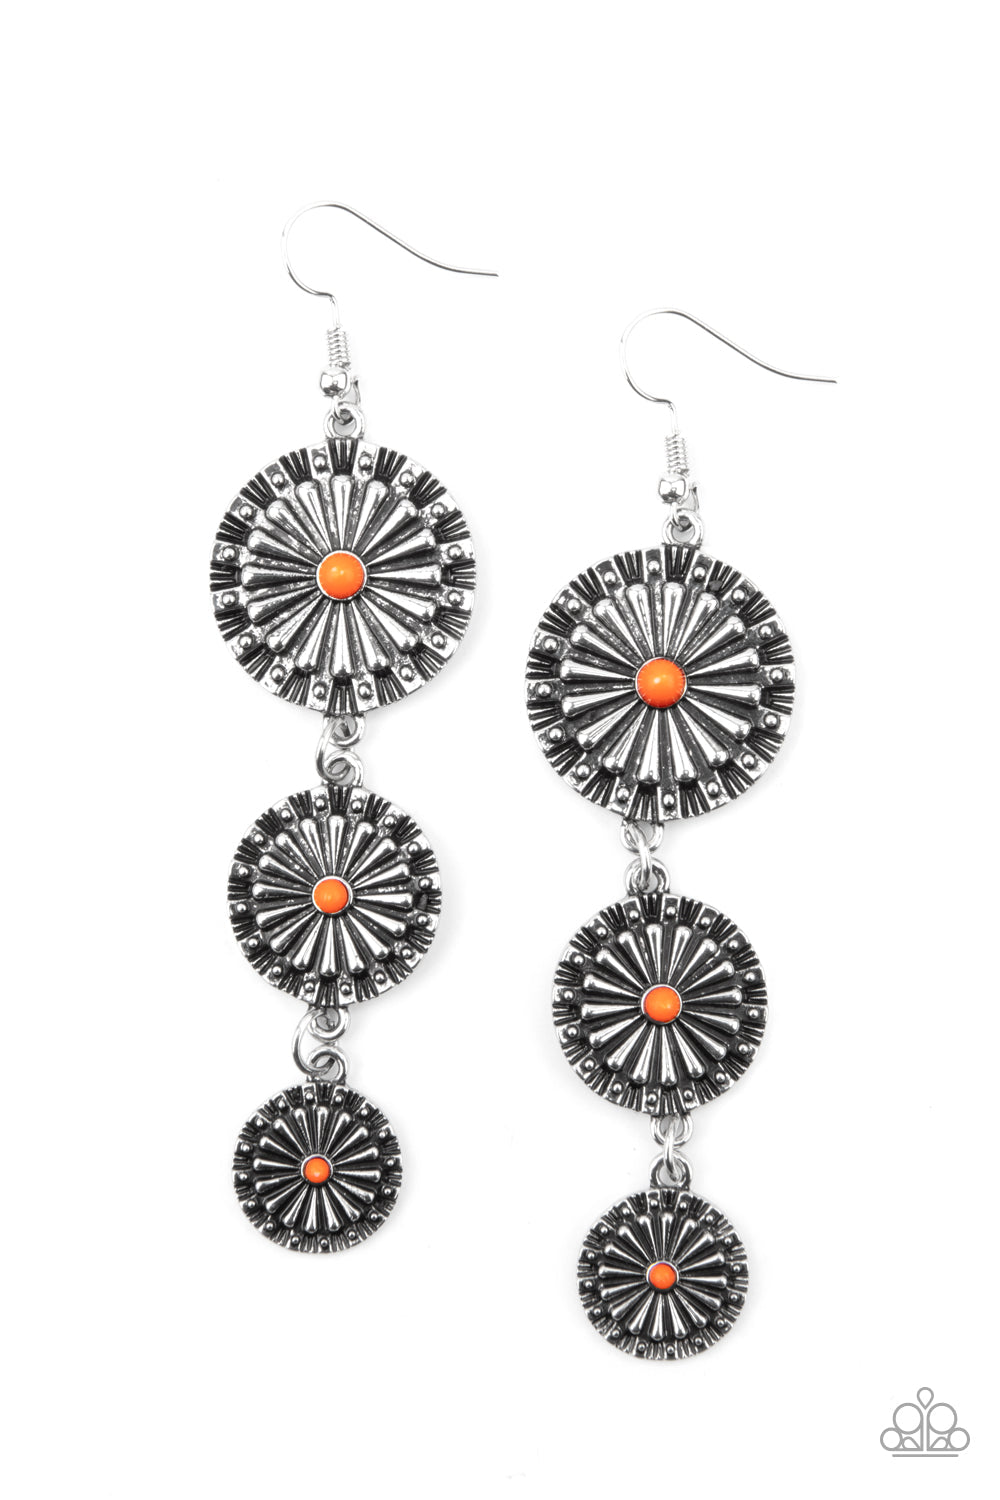 Festively Floral - Orange and Silver Earrings - Paparazzi Accessories - Dotted with dainty orange beads, rustic silver floral frames gradually decrease in size as they swing from the ear, creating a colorful lure. Earring attaches to a standard fishhook fitting. Sold as one pair of earrings.